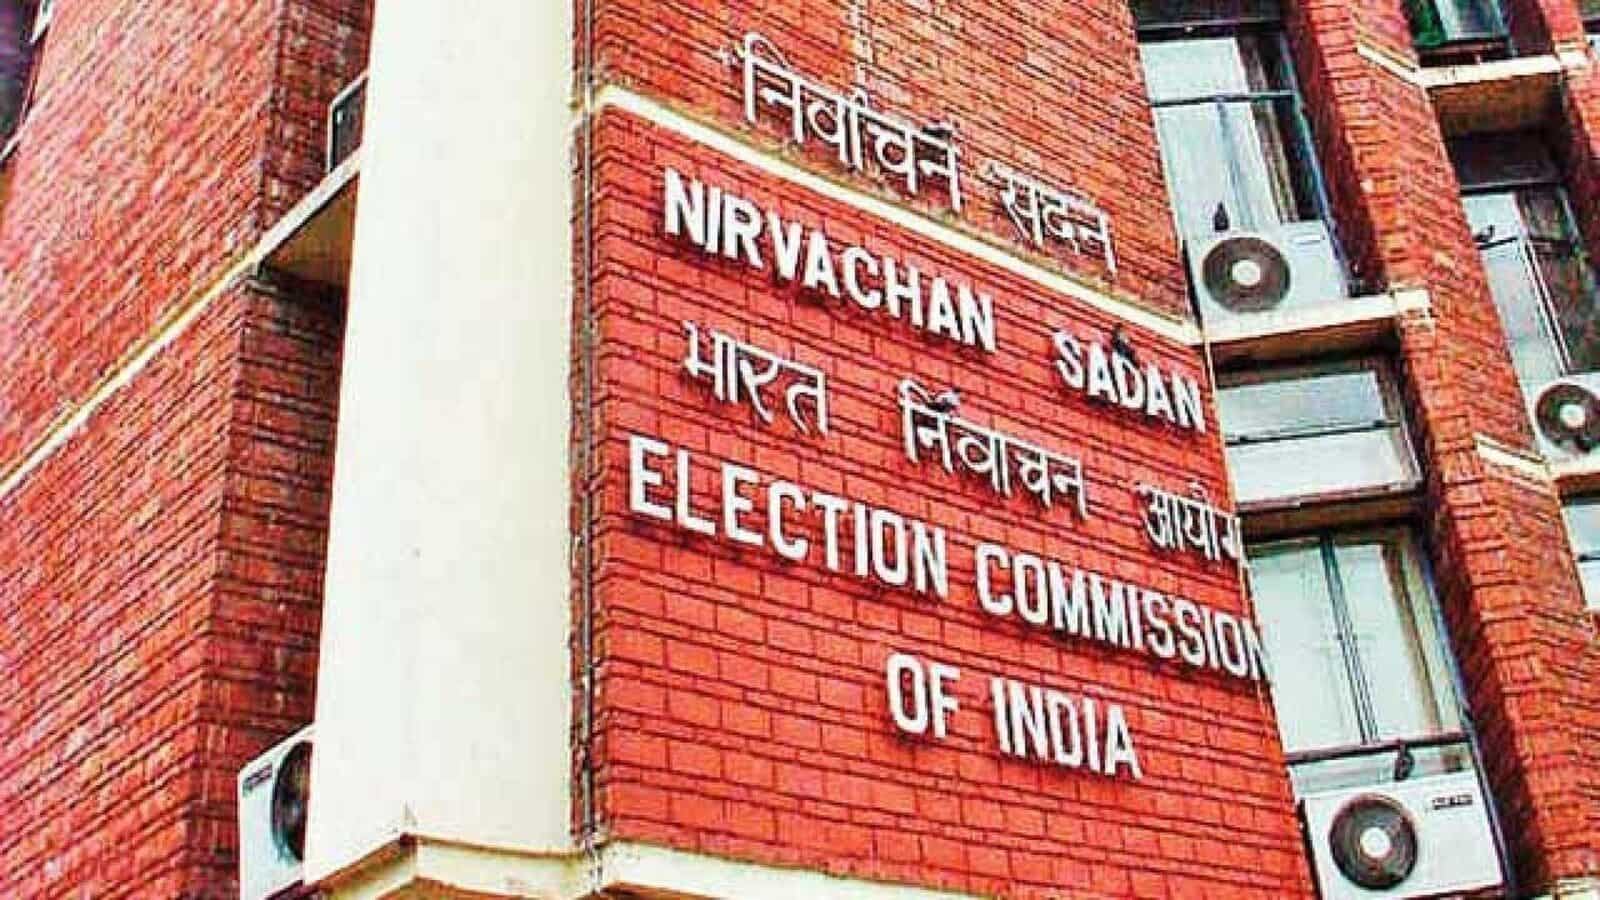 EC extends ban on roadshows, vehicle rallies for polls; relaxes norms for indoor and outdoor political meets